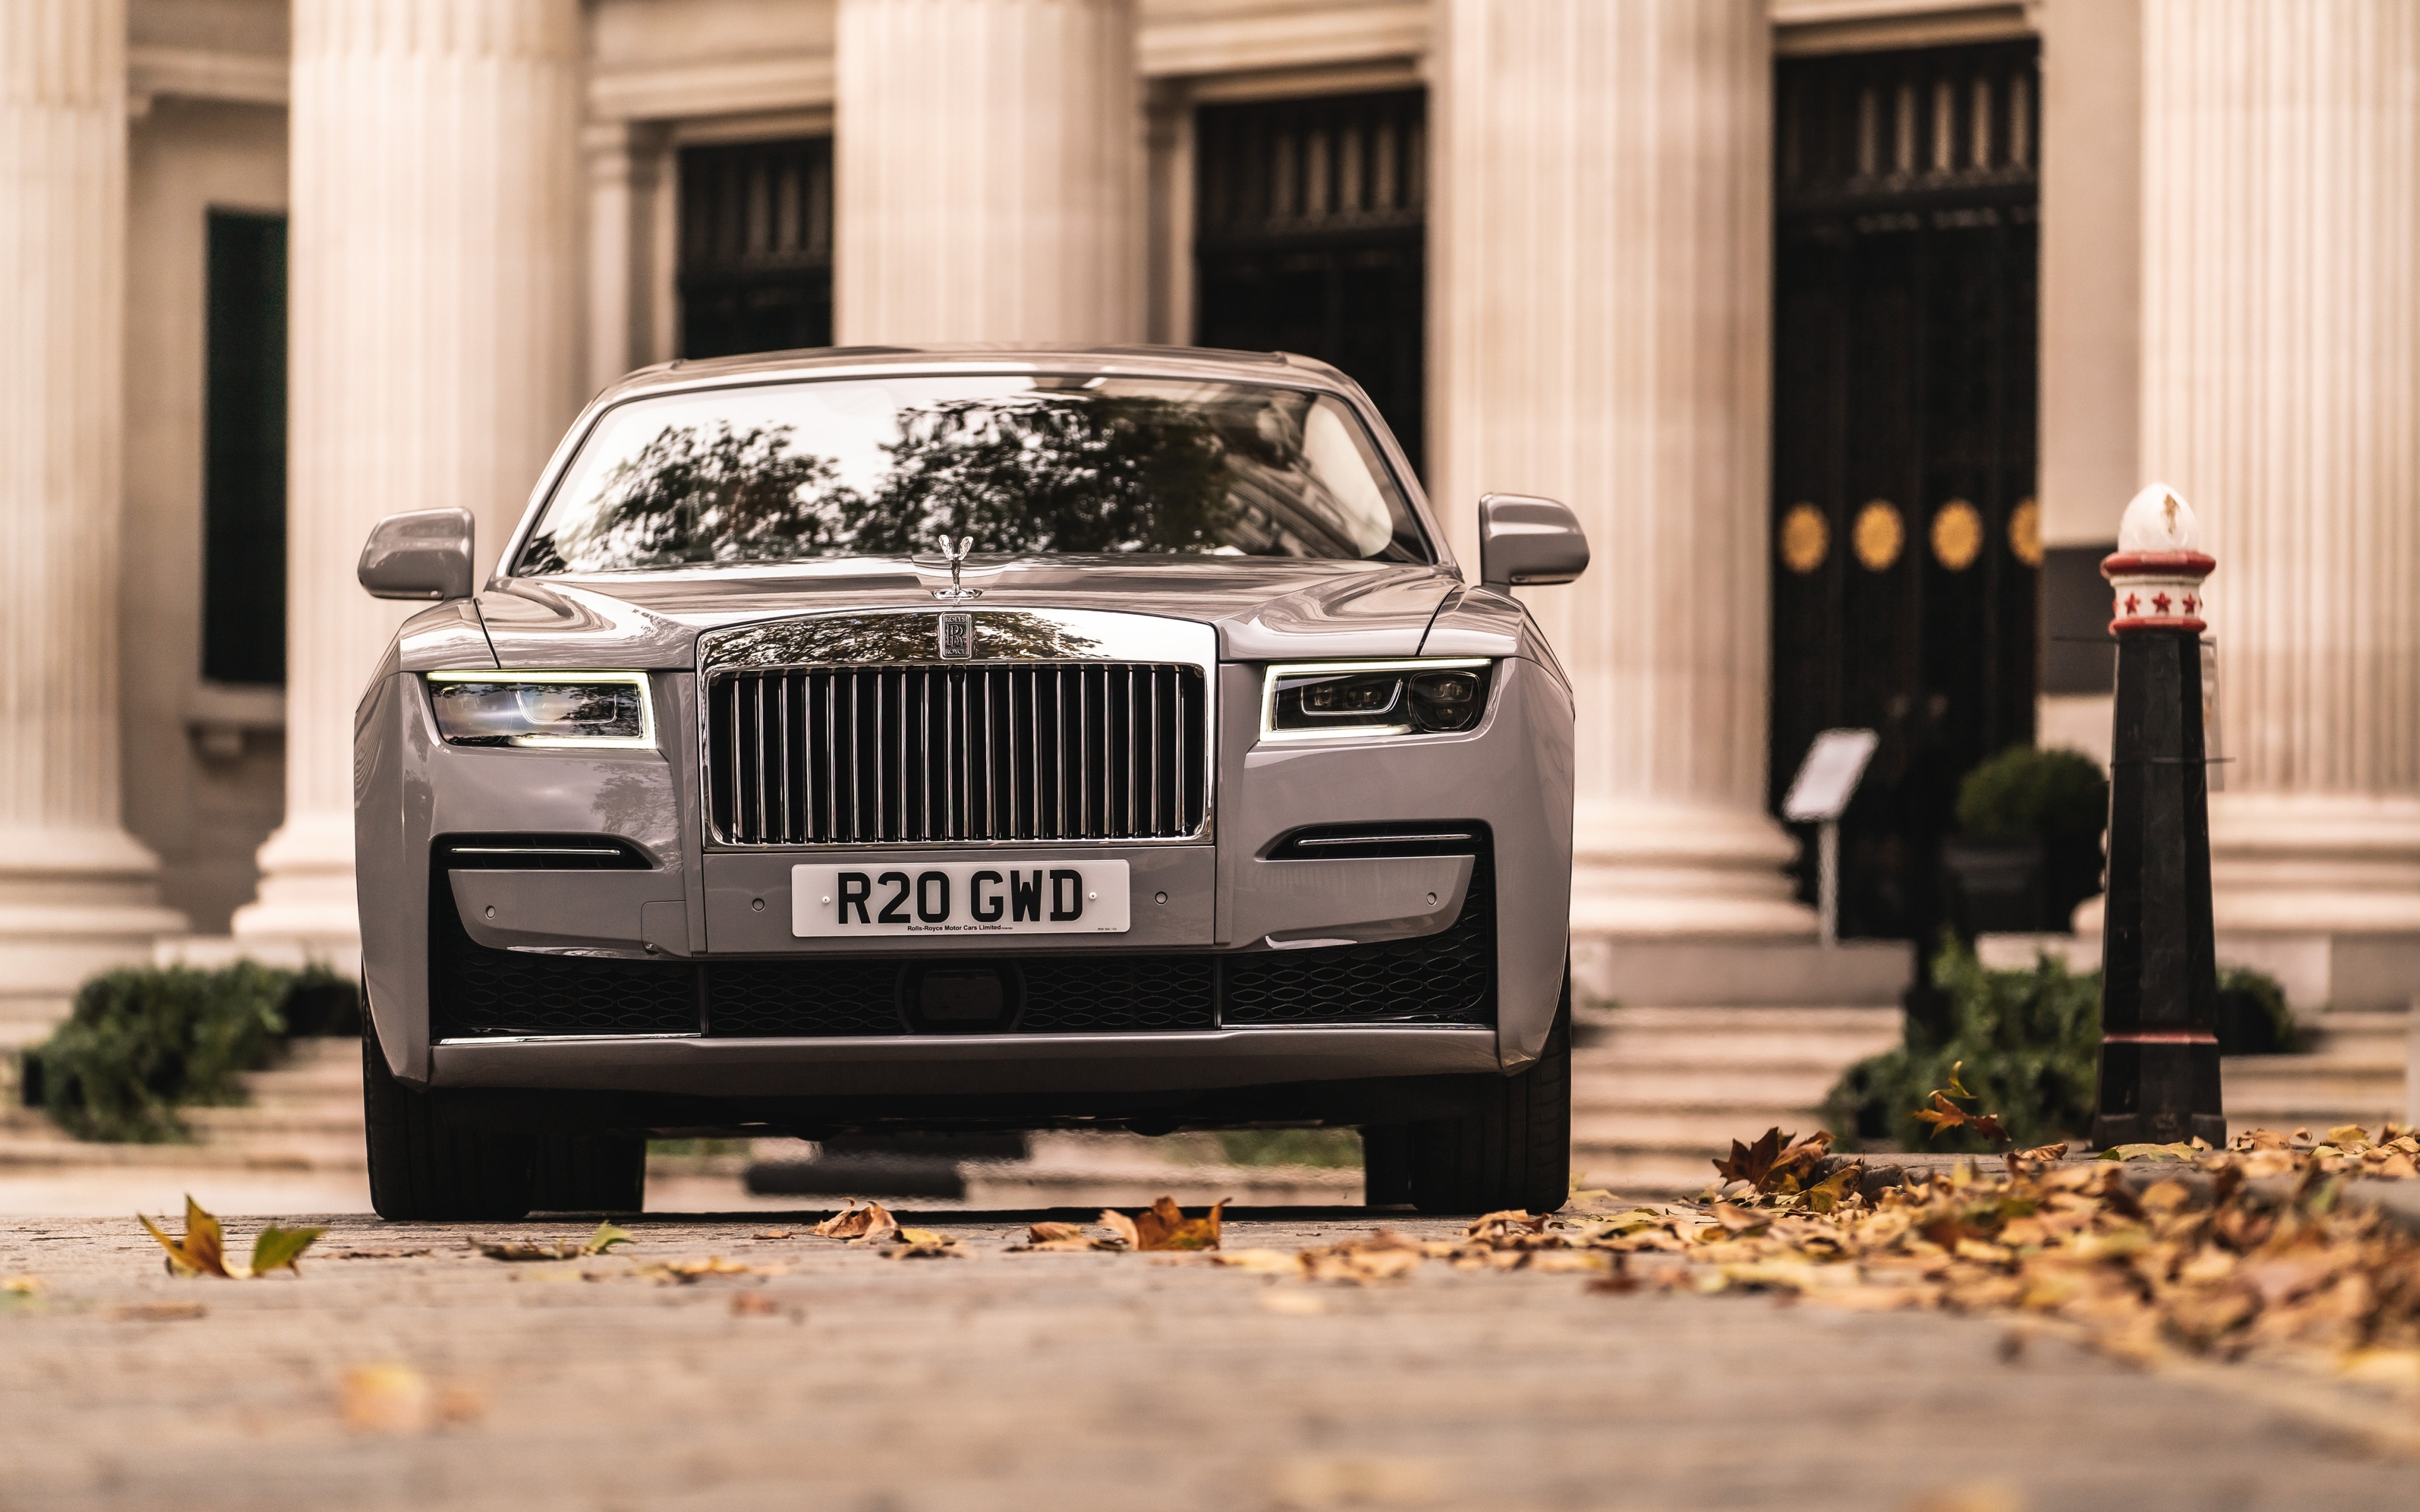 Wallpaper Luxury Cars, Rolls Royce Ghost, Front View:5120x2880